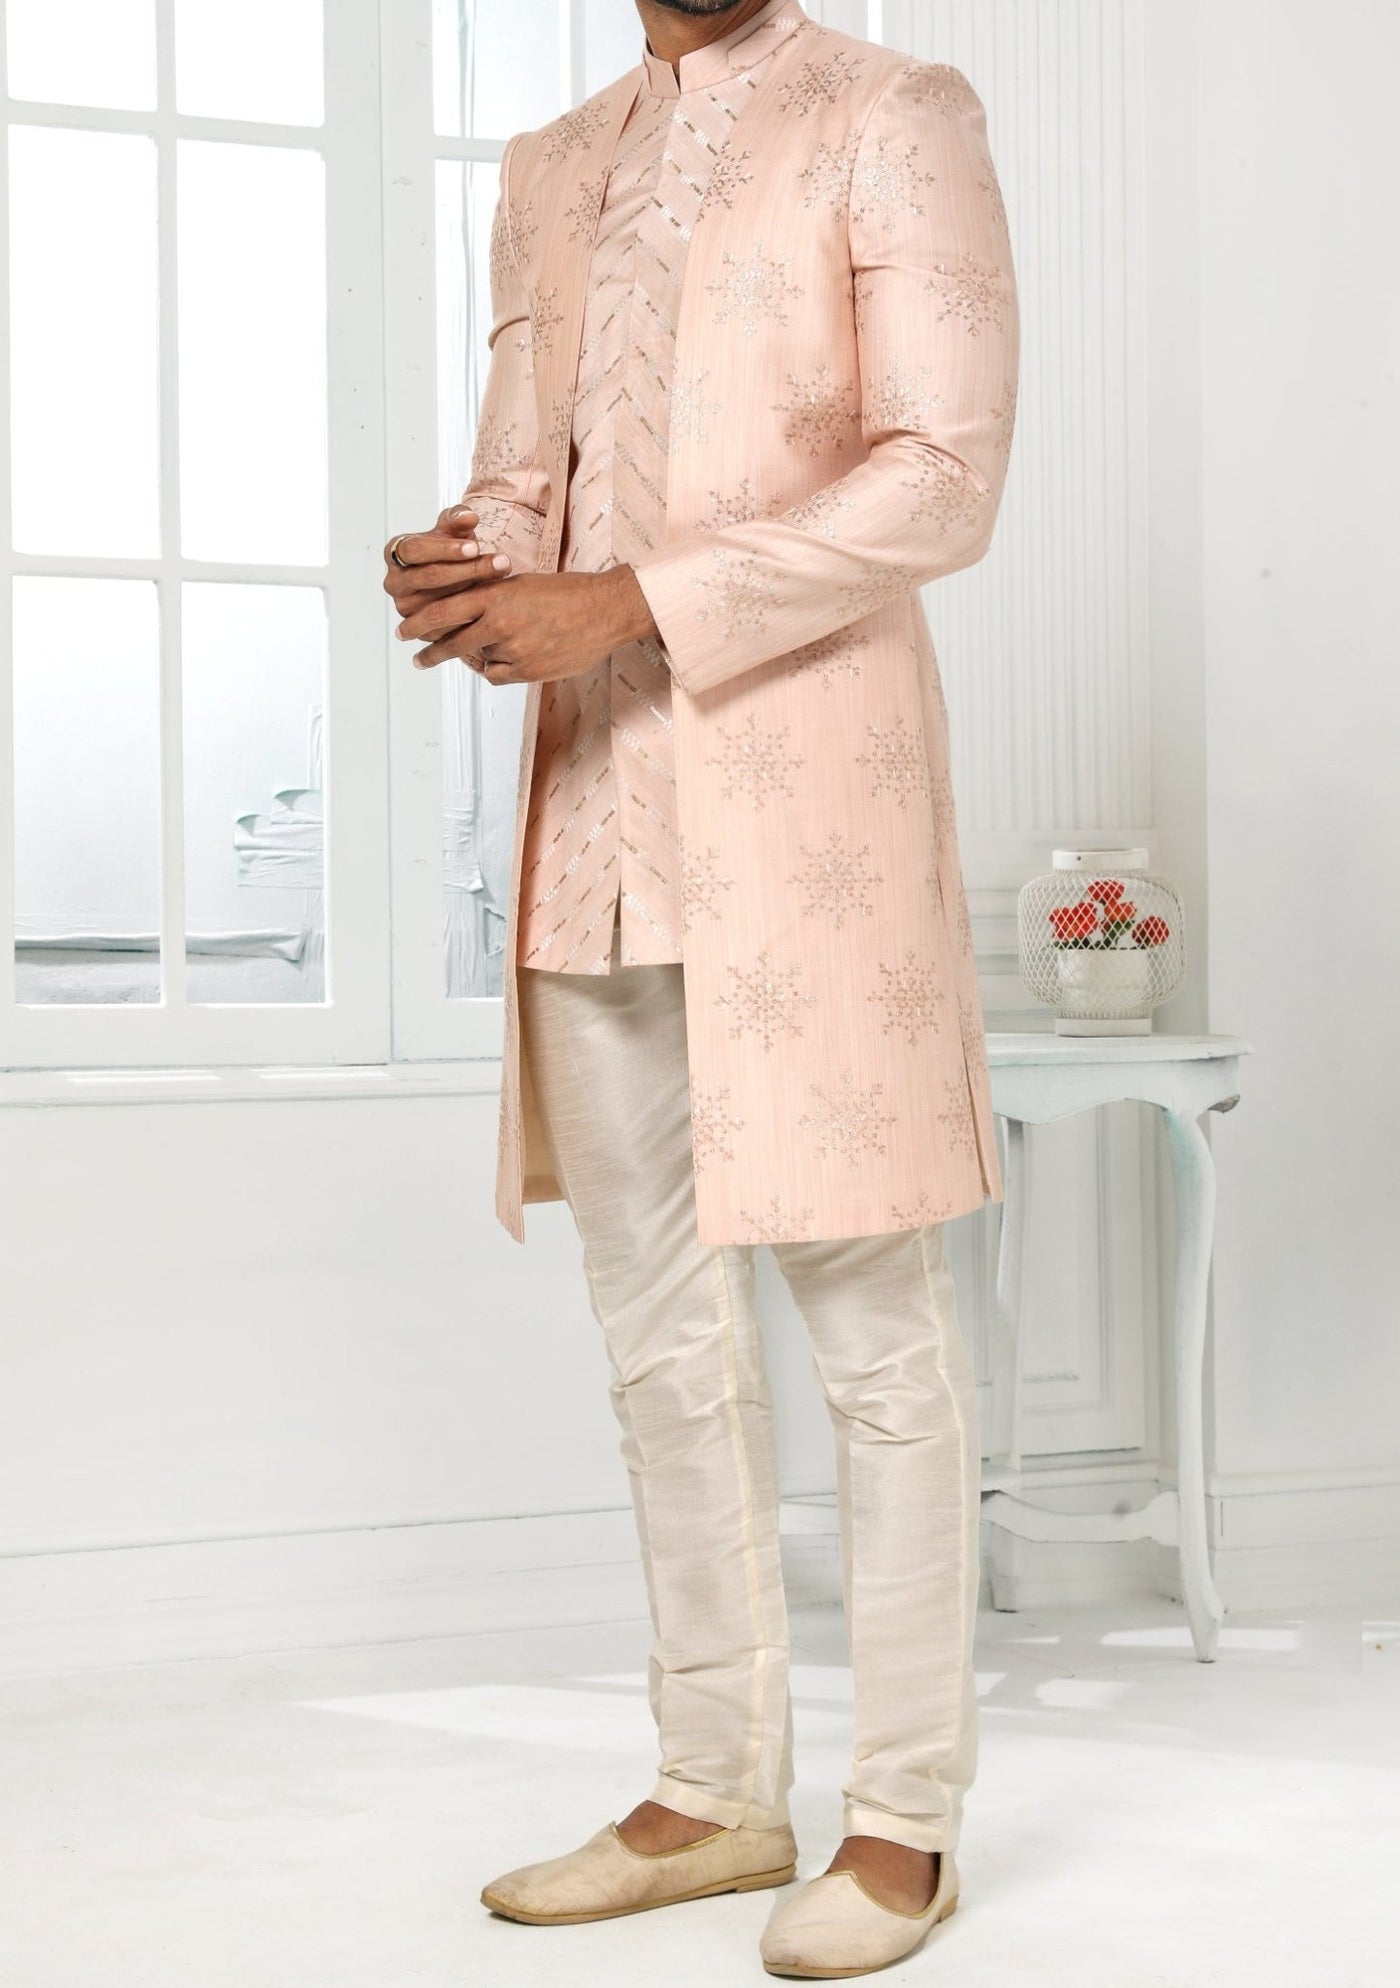 Men's Indo Western Party Wear Sherwani Suit With Jacket - db20434